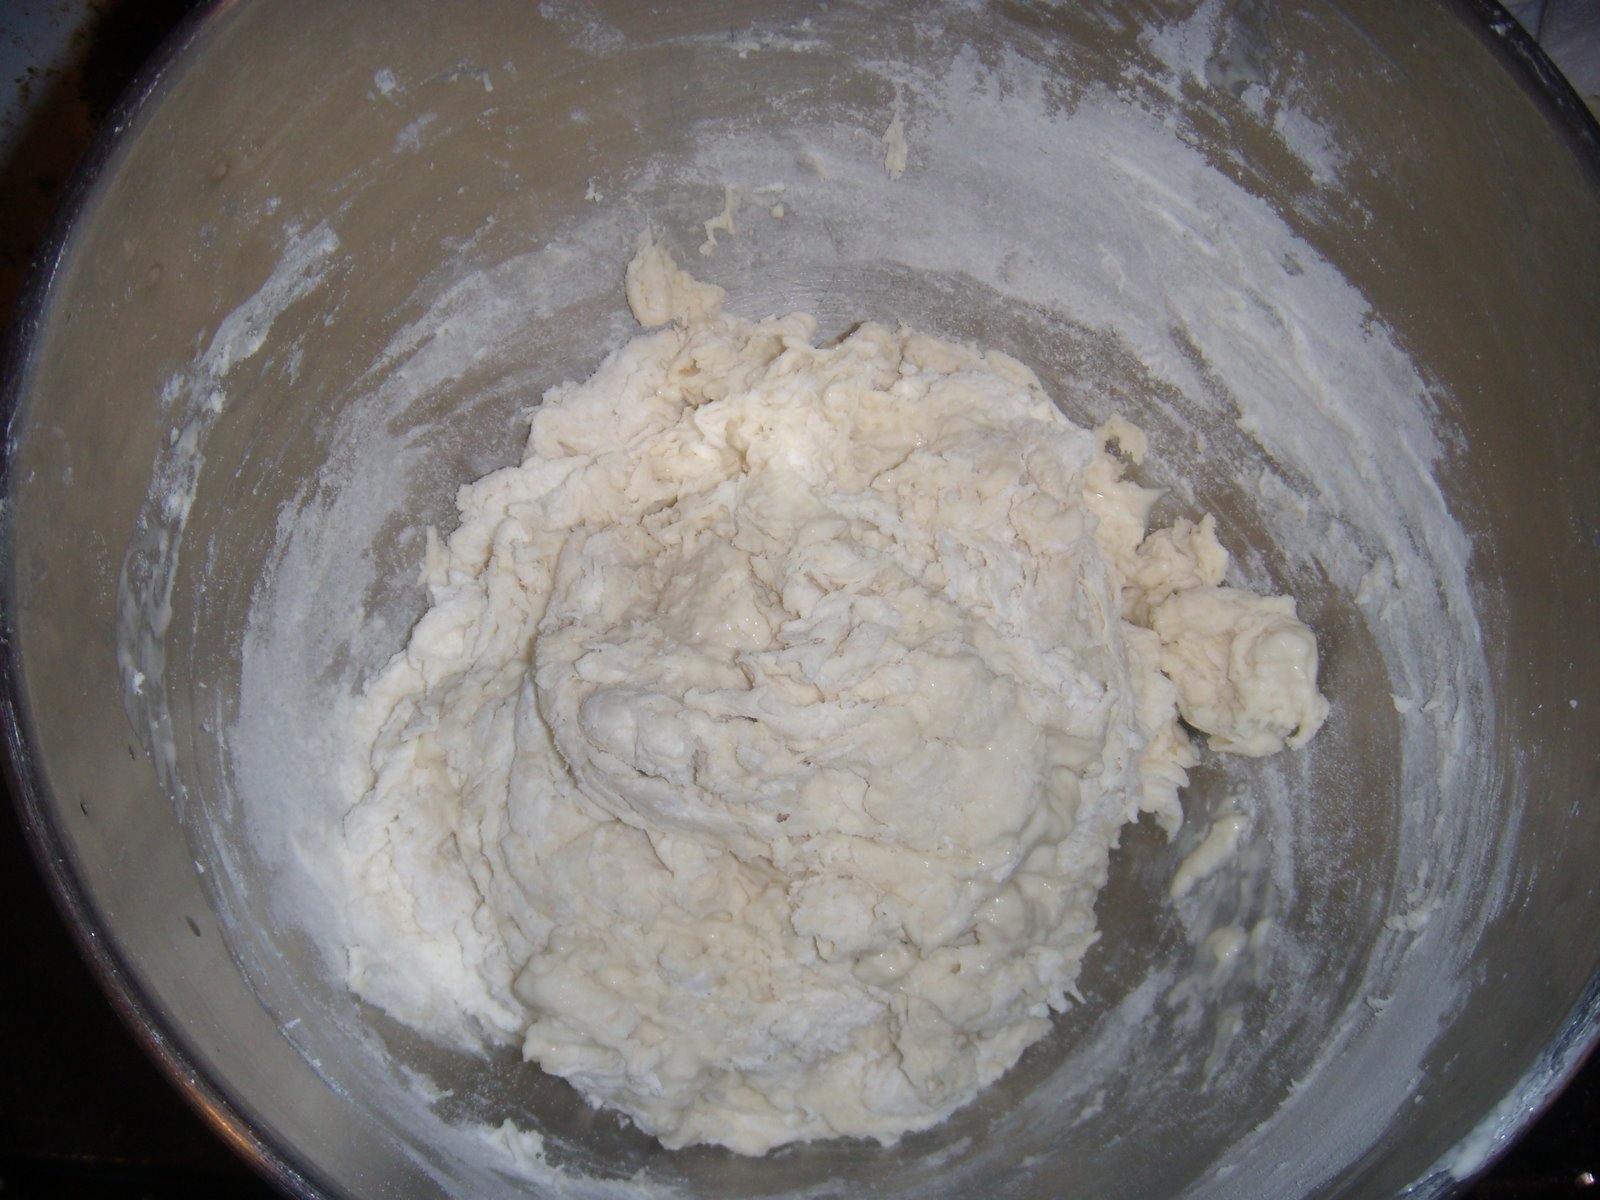 [Puccia-+Dough+Brought+Together+and+Ready+to+be+Kneaded.JPG]